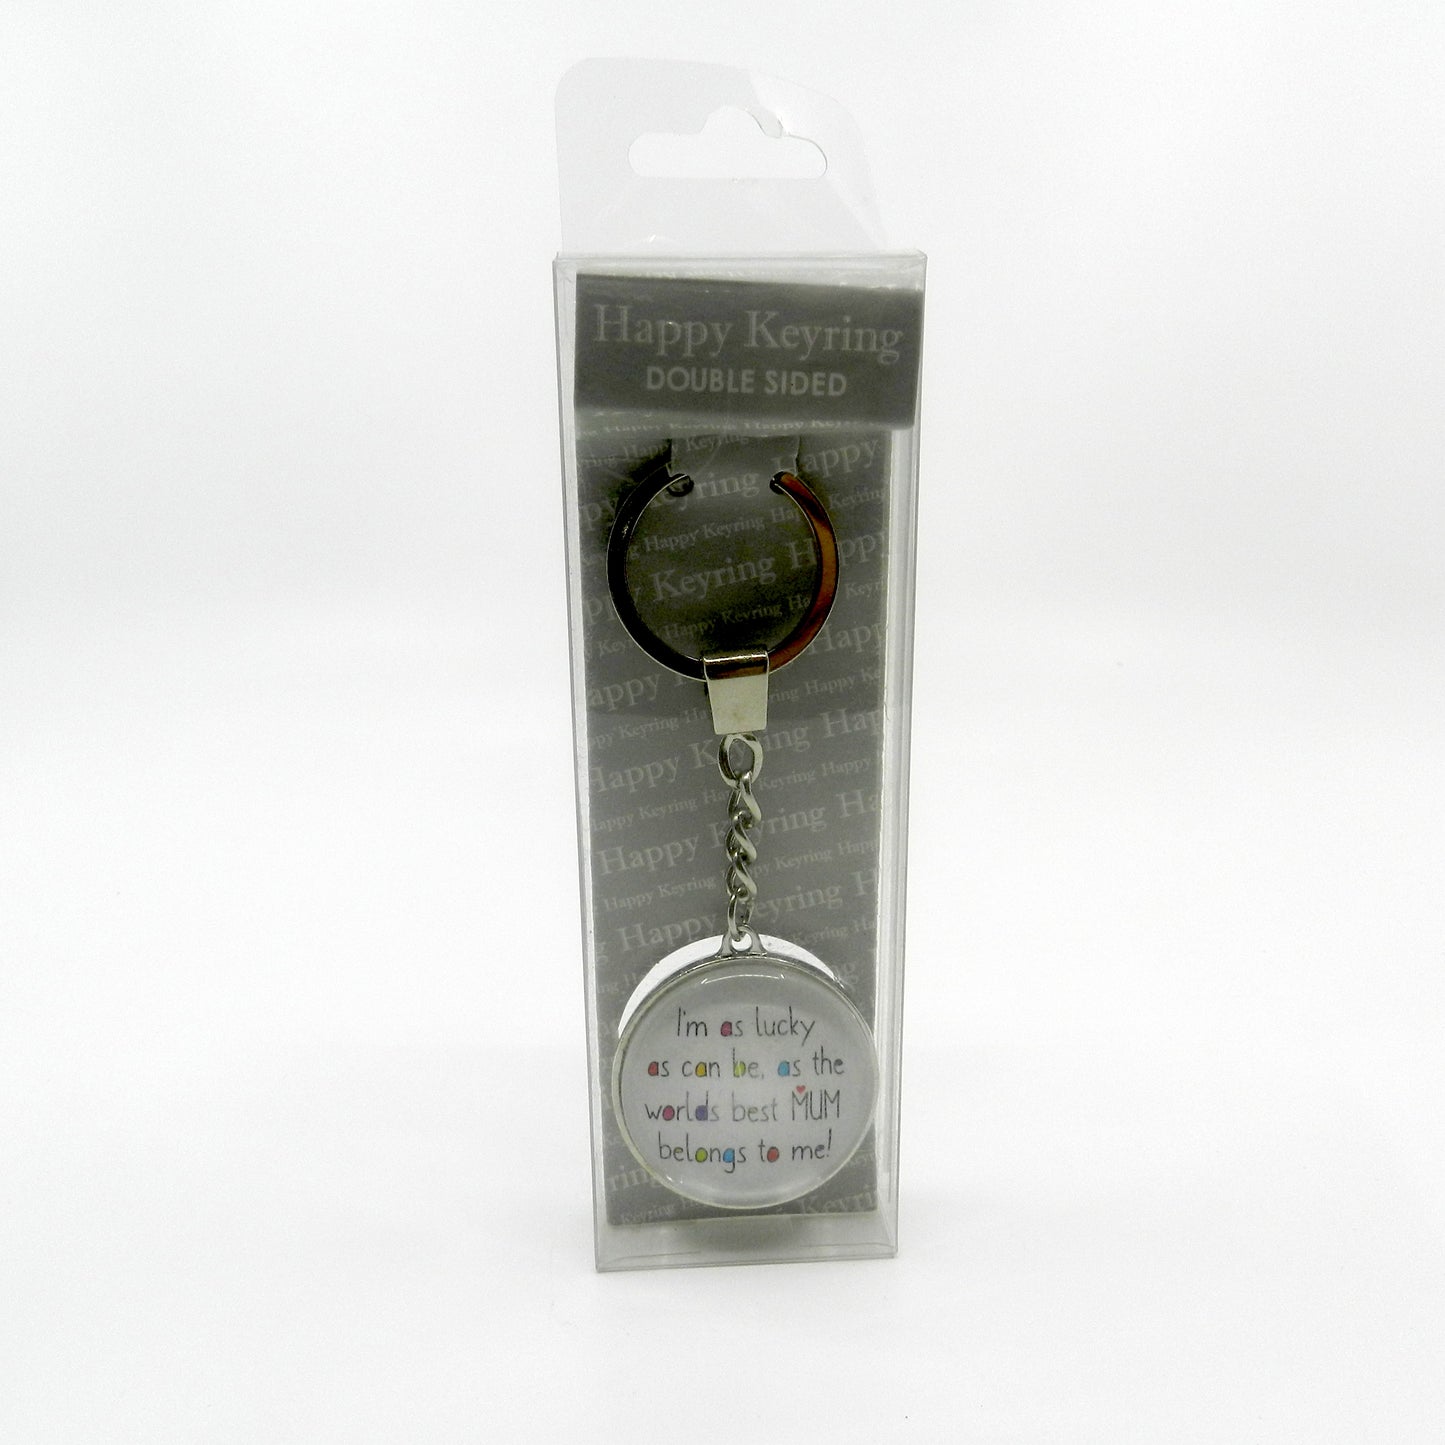 Happy Keyring Double Sided - I'm as lucky as can be, as the worlds best Mum belongs to me